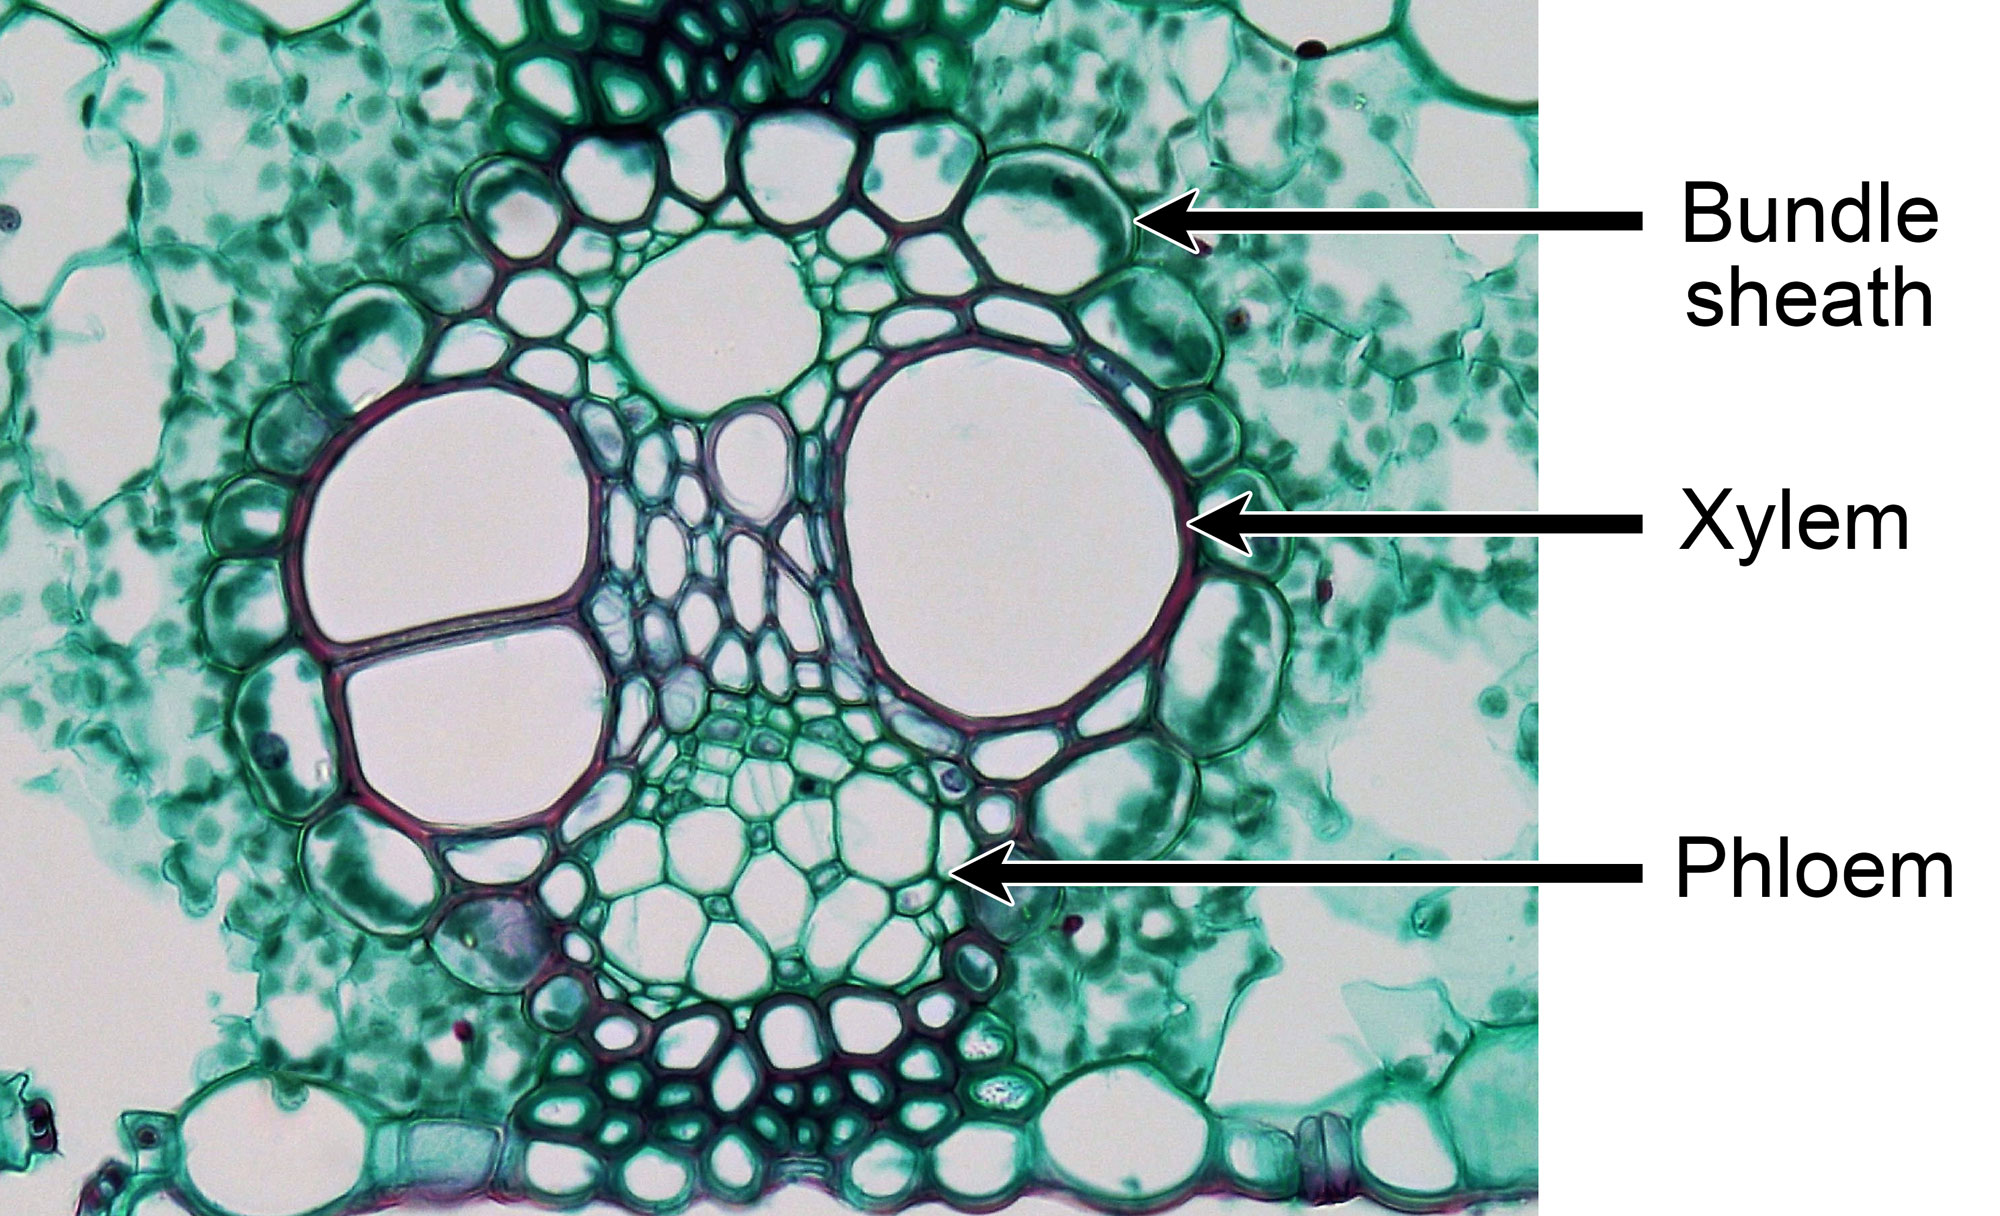 Photograph of a cross section of a vascular bundle from a maize leaf; the bundle has been stained to highlight the different cell types. The vascular bundle is circular with xylem on the upper side and phloem on the lower side. The walls of the vessel elements are stained red, and some are very large. The phloem is stained blue-green, with larger sieve elements and smaller companion cells. A ring of large bundle sheath cells with chloroplasts near their outer walls surround the vascular tissue. The bundle sheath, xylem, and phloem are labeled.